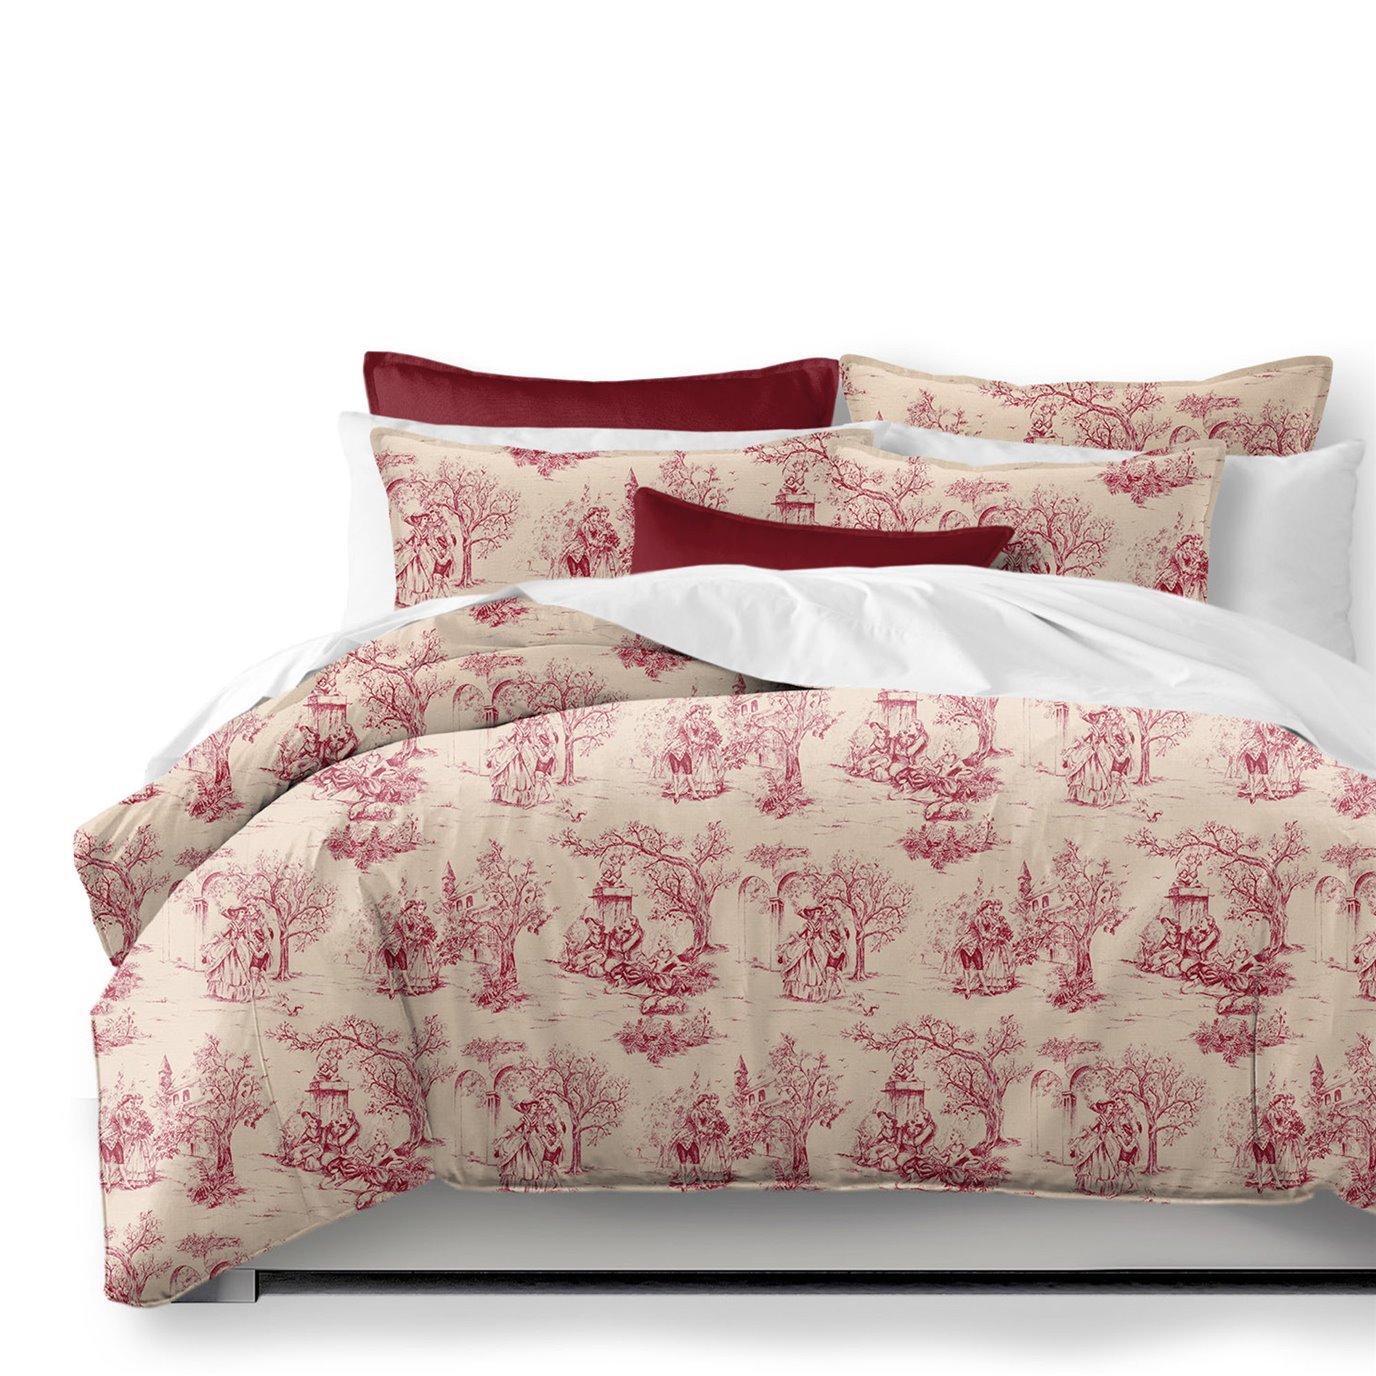 Archamps Toile Red Duvet Cover and Pillow Sham(s) Set - Size Full